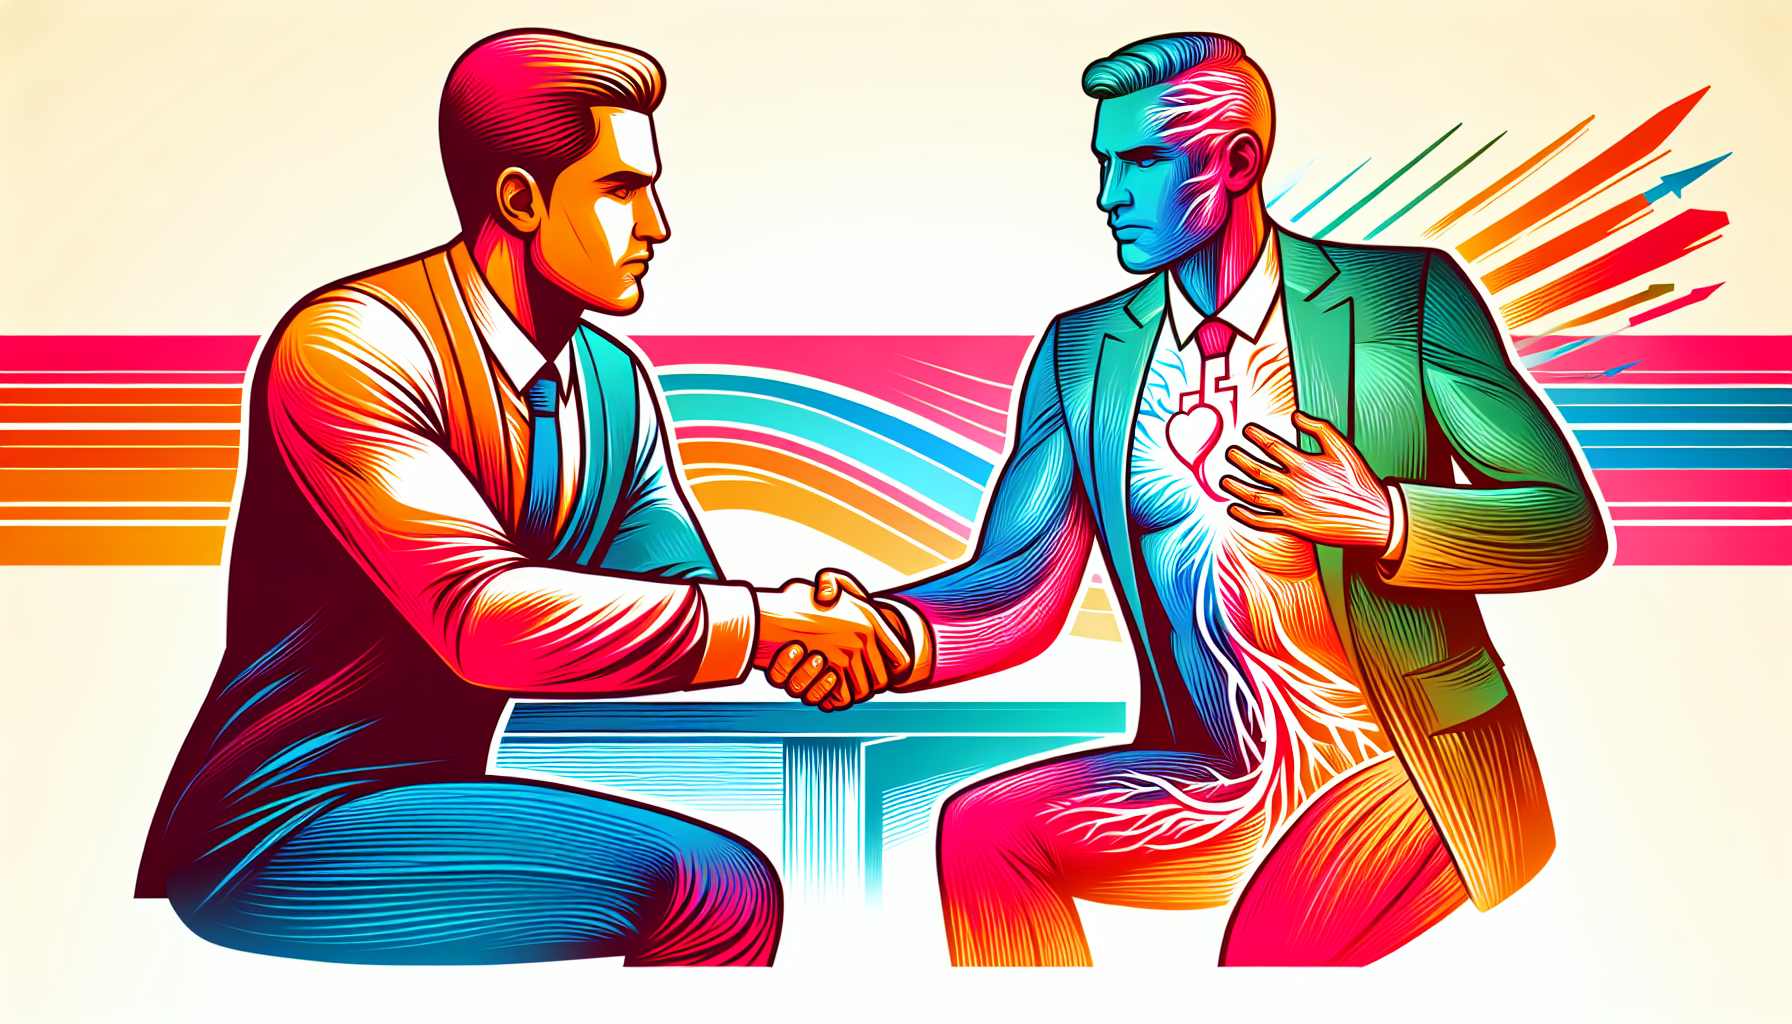 Illustration of Chris Voss in a negotiation process, emphasizing the importance of emotional control